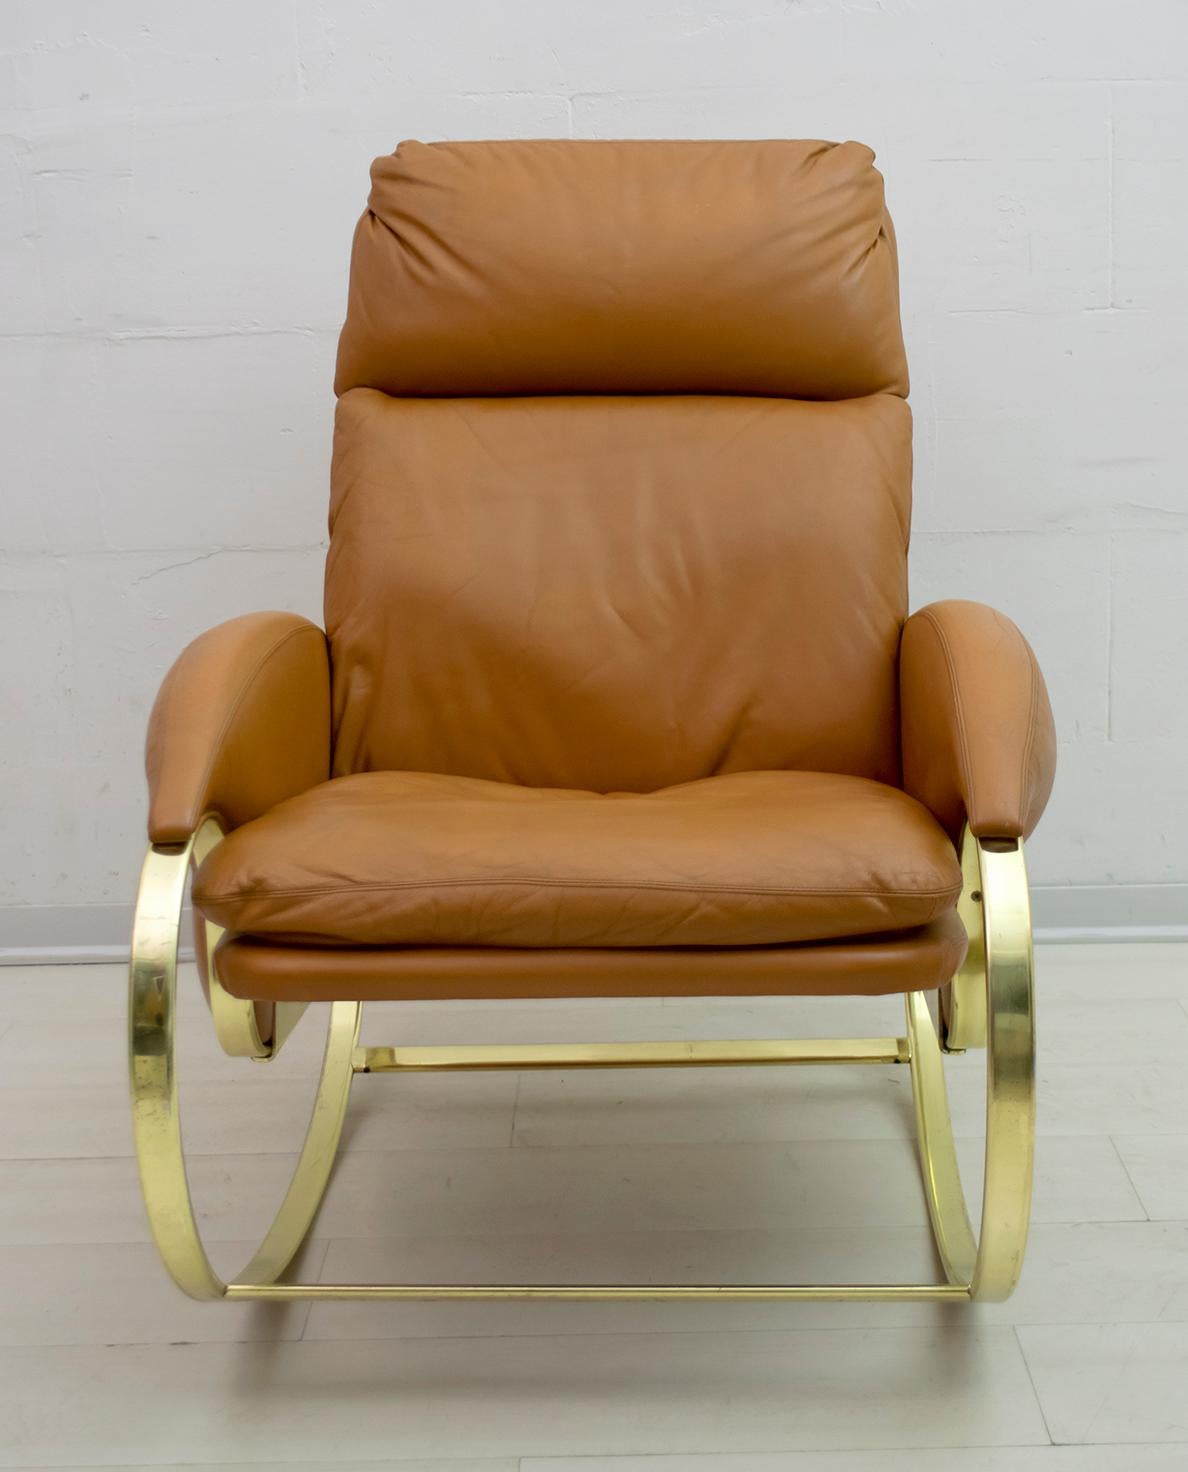 Rocking chair designed by Guido Faleschini in the 1970s. Elegant rocking chair with curved and golden metal structure, the upholstery is in real leather. As can be seen from the photos, normal signs of wear over time.